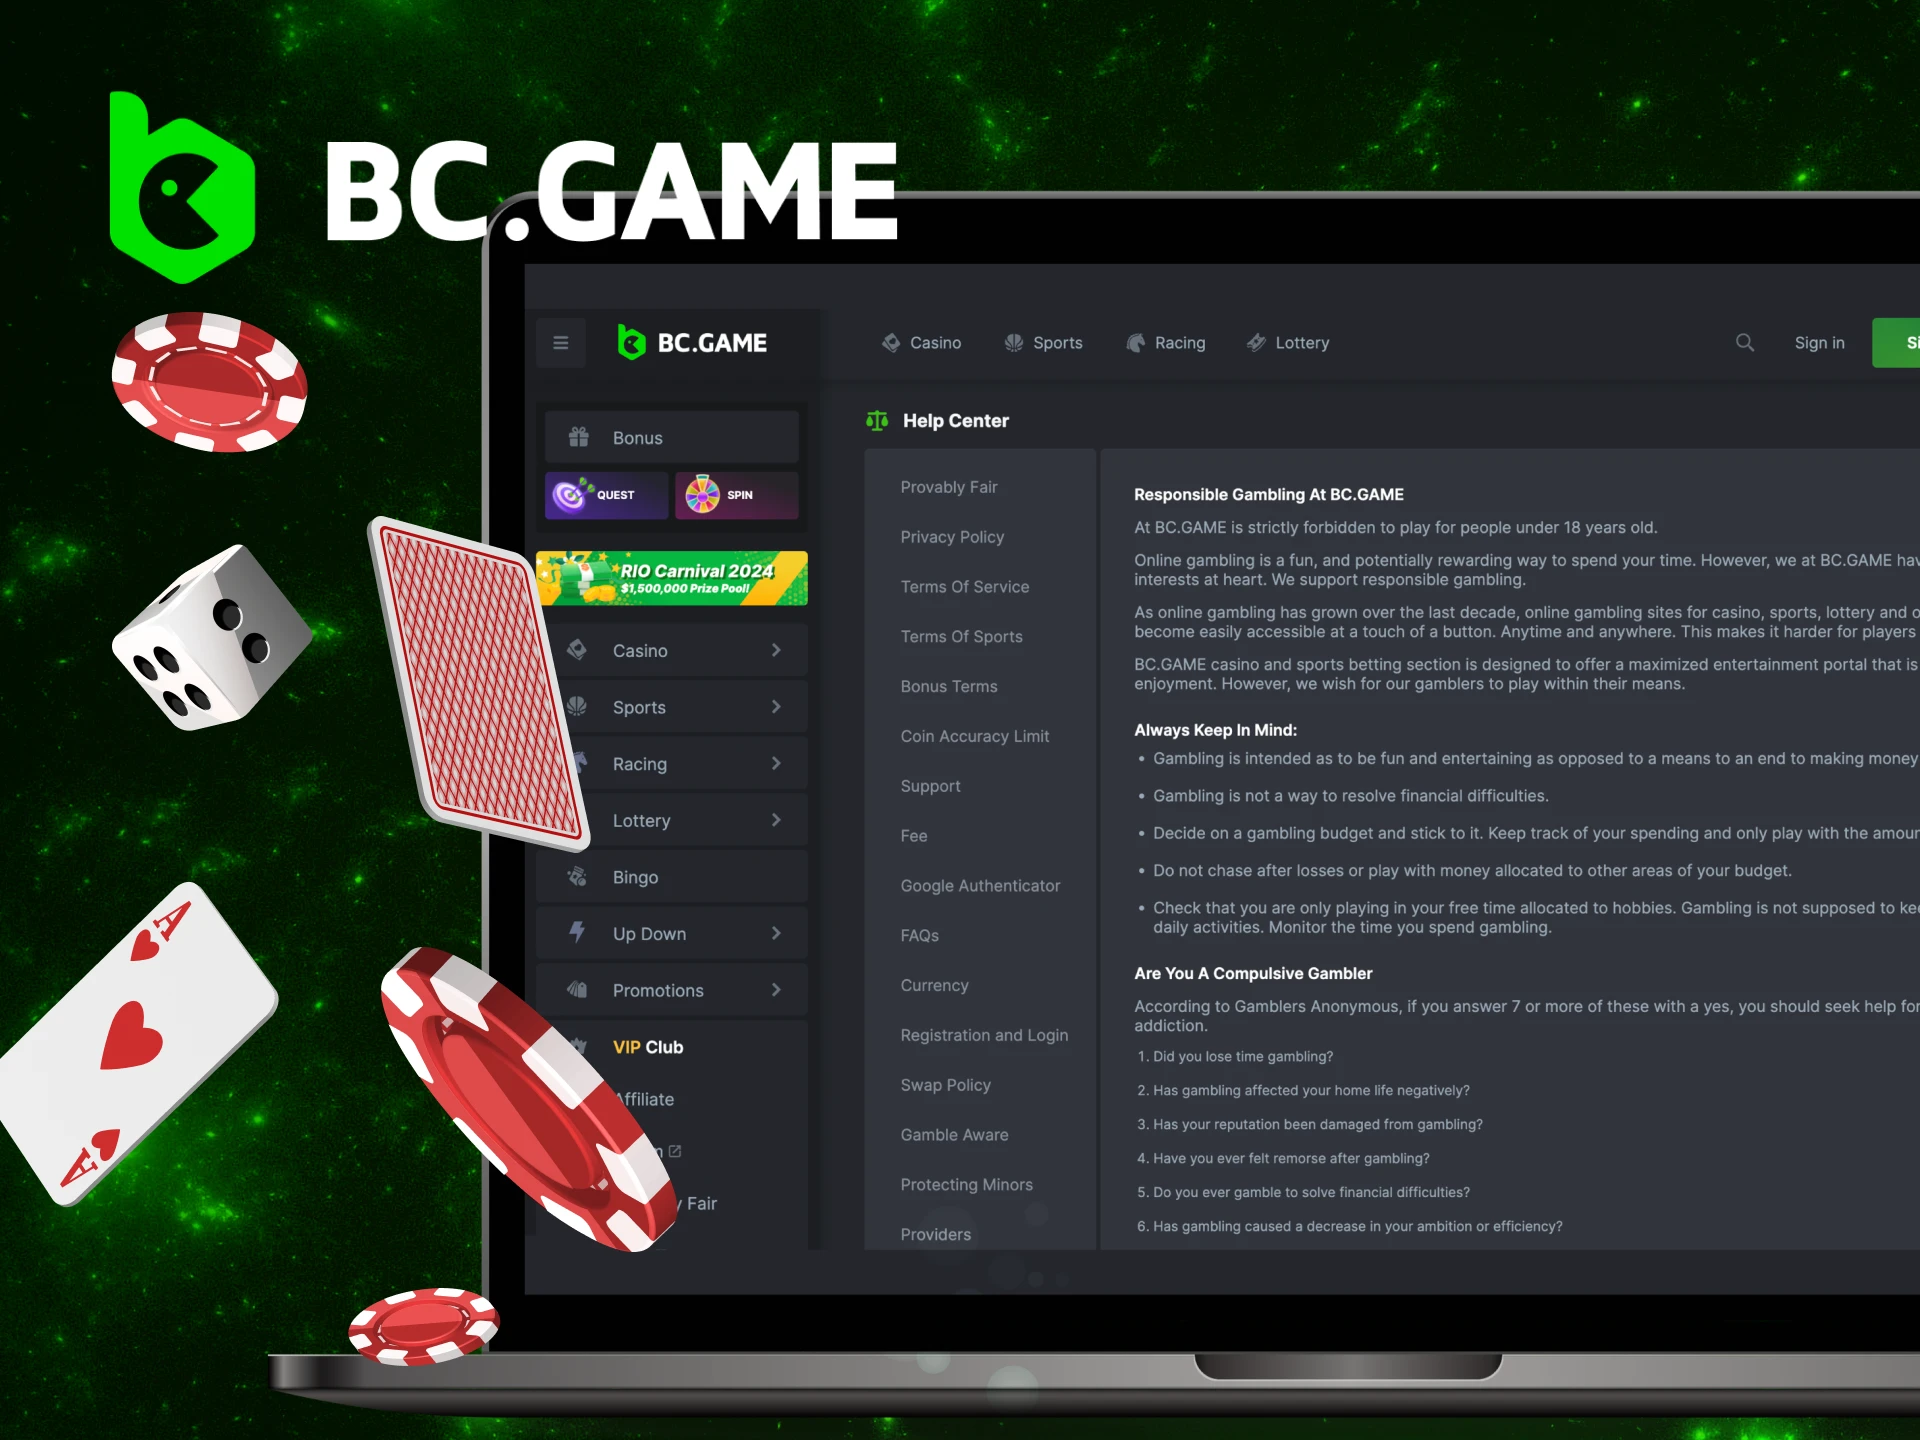 What are the main provisions for responsible gaming at BC Game online casino in India.